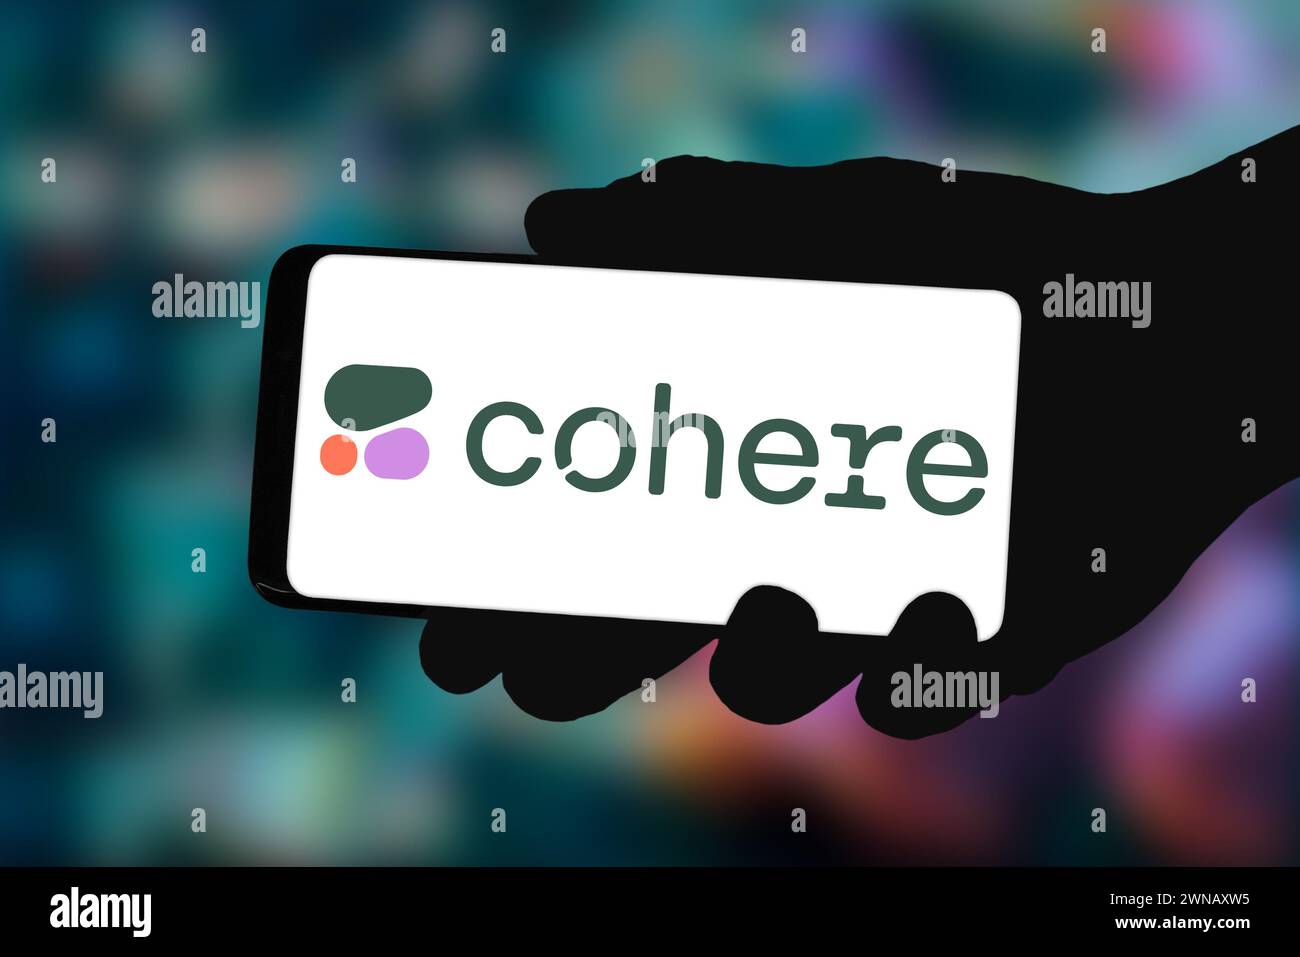 Cohere company logo is displayed on a smartphone Stock Photo